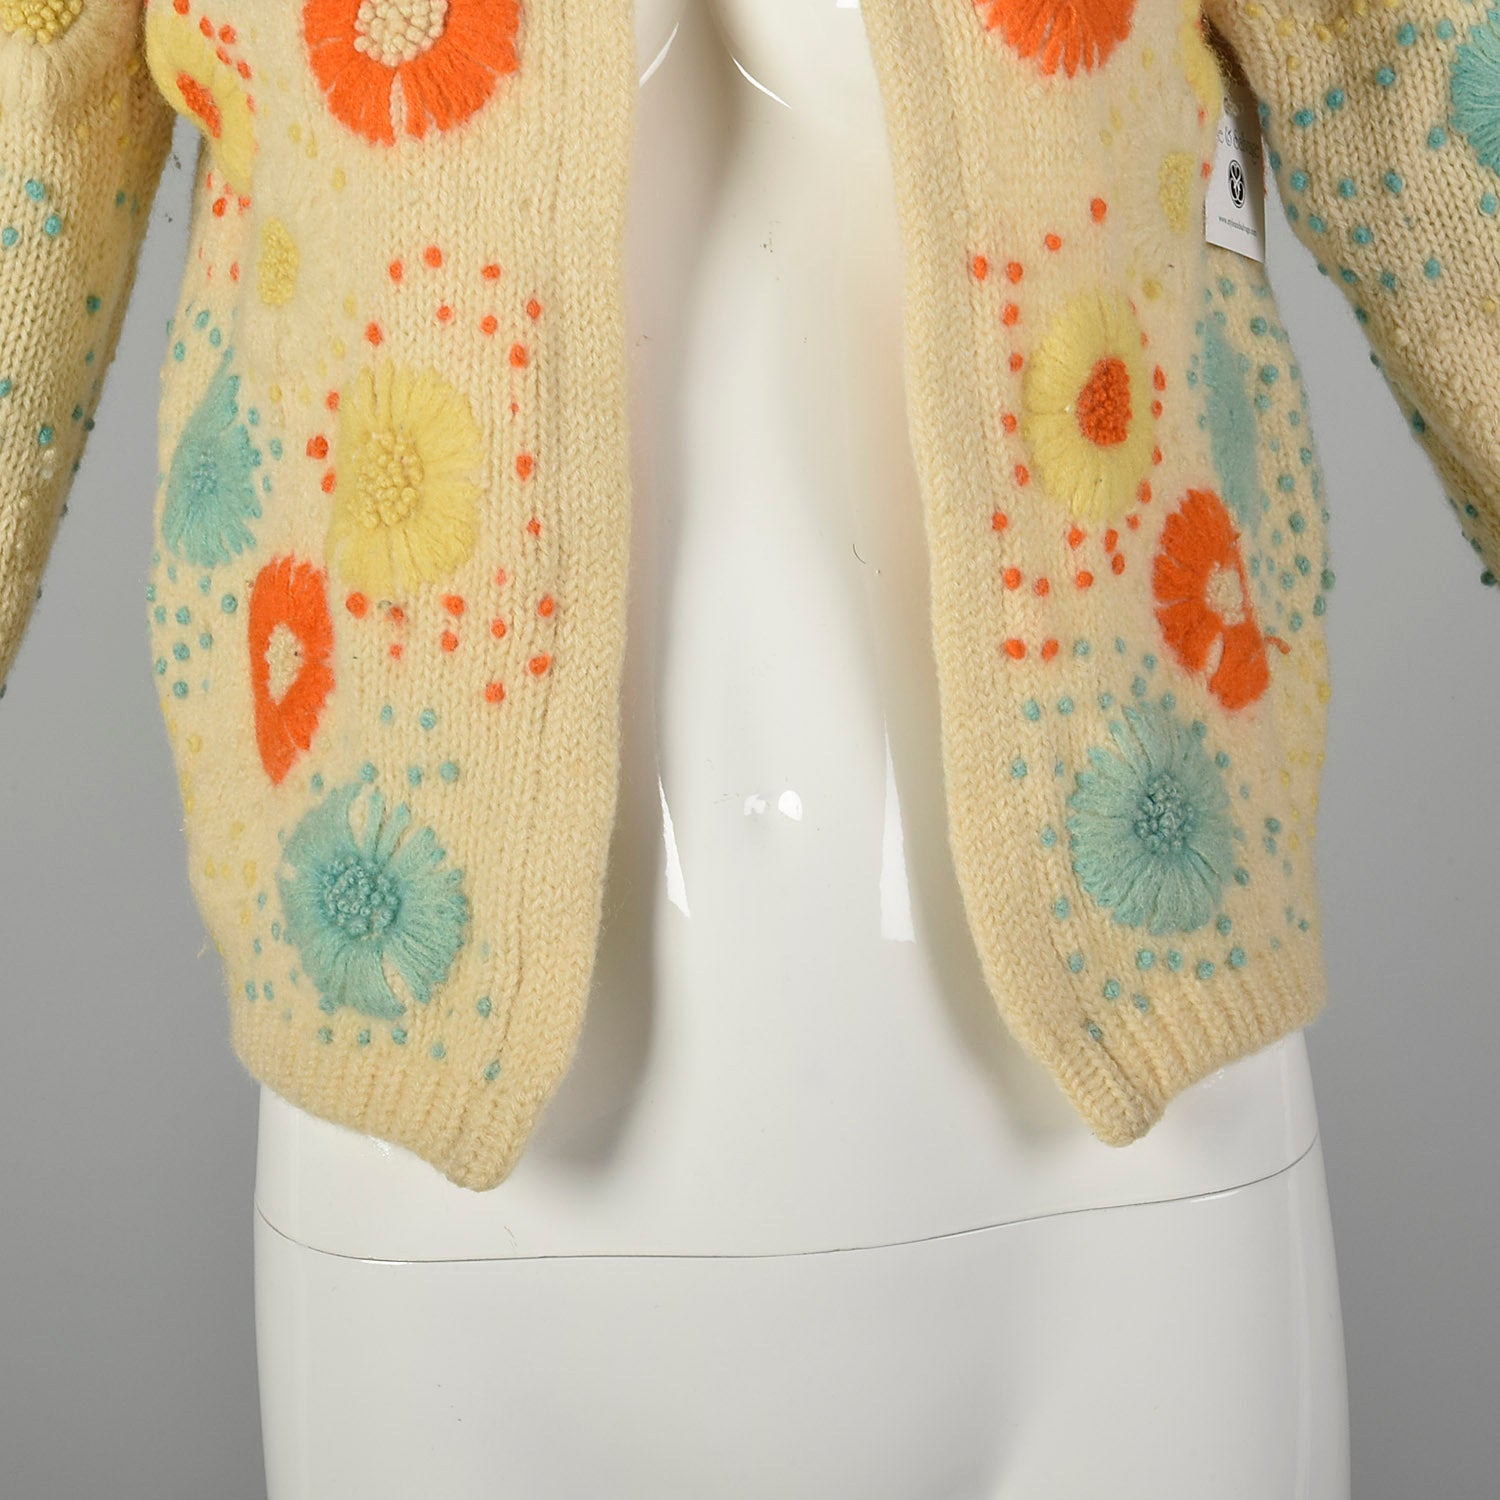 Small 1960s Boho Cardigan Cream Sweater with Multi-Color Floral Embroidery